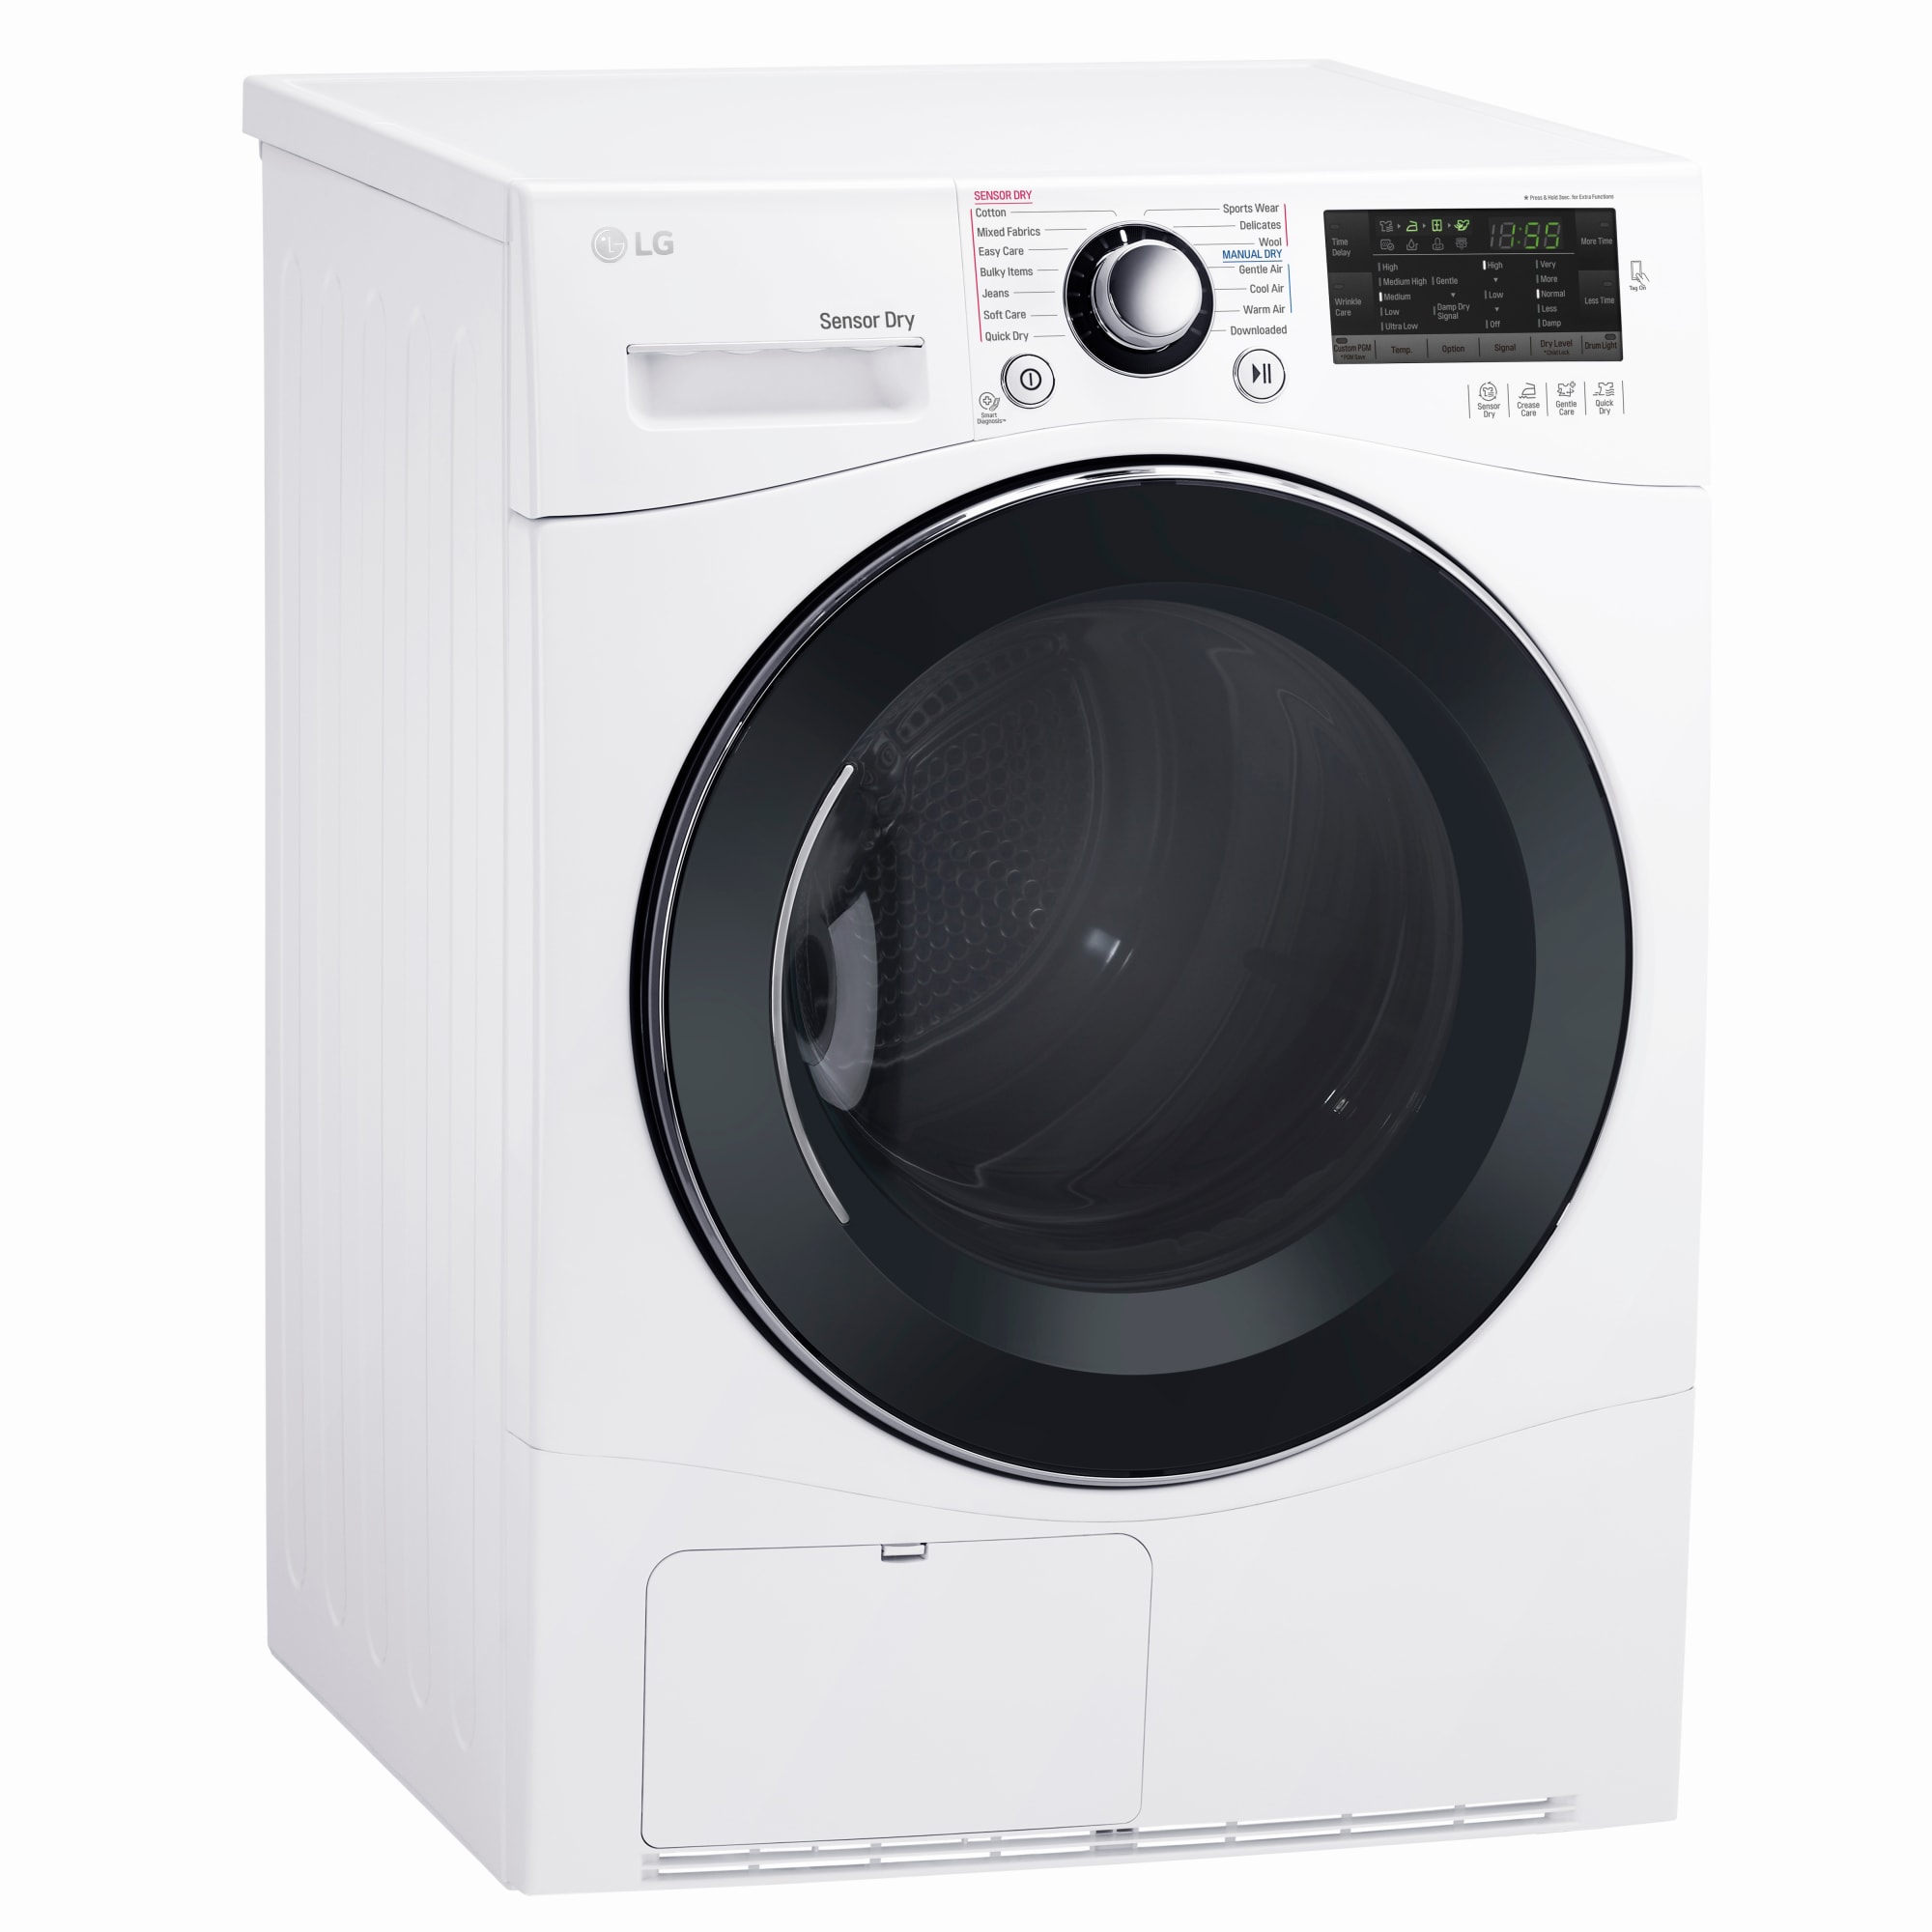 LG DLEC888W 24 Inch Electric Smart Dryer with 4.2 Cu. Ft. Capacity